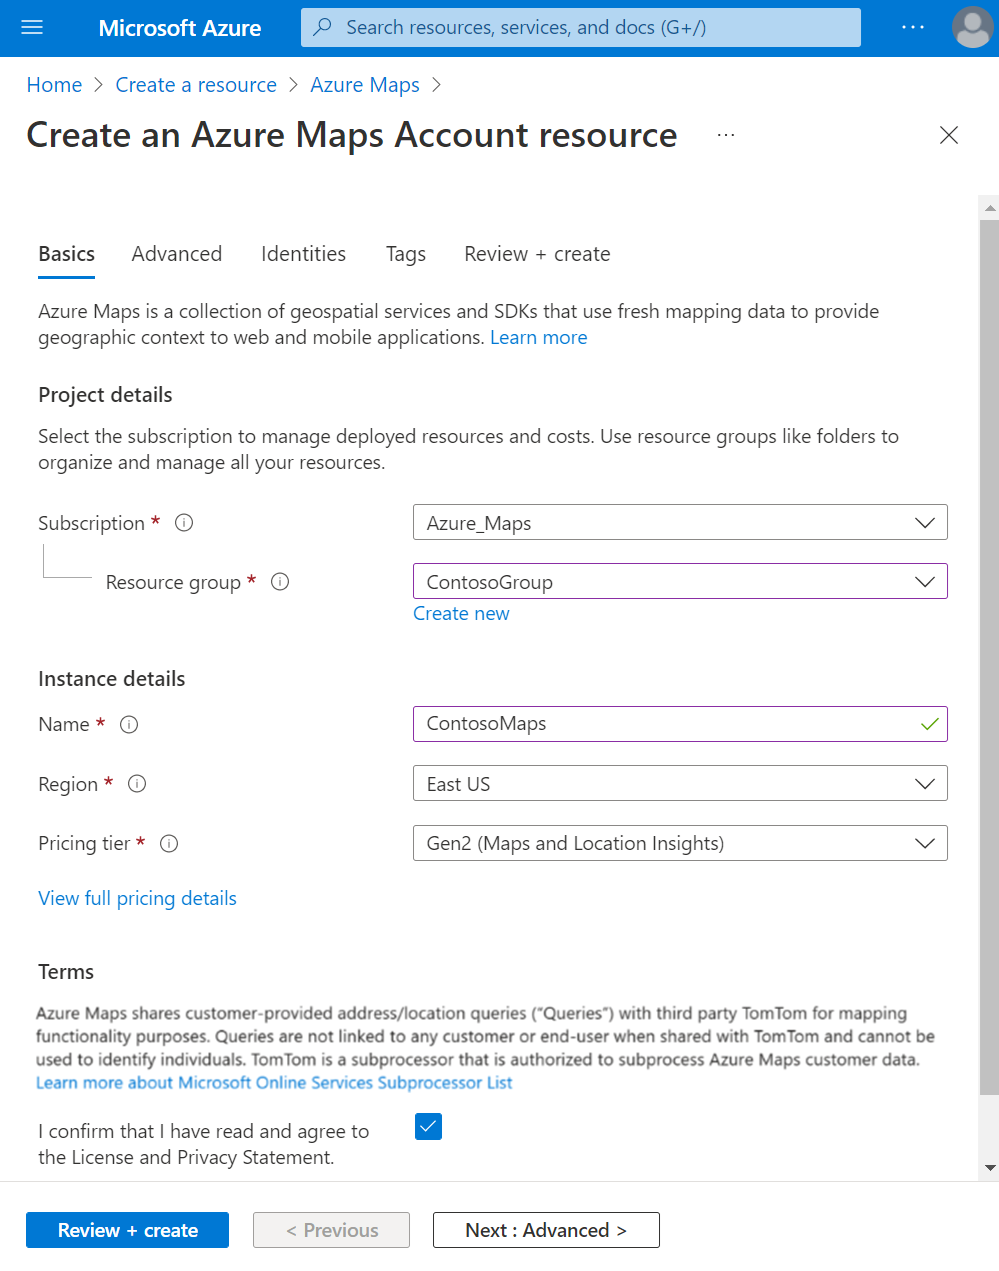 Screenshot showing the Create an Azure Maps Account resource page in the Azure portal.